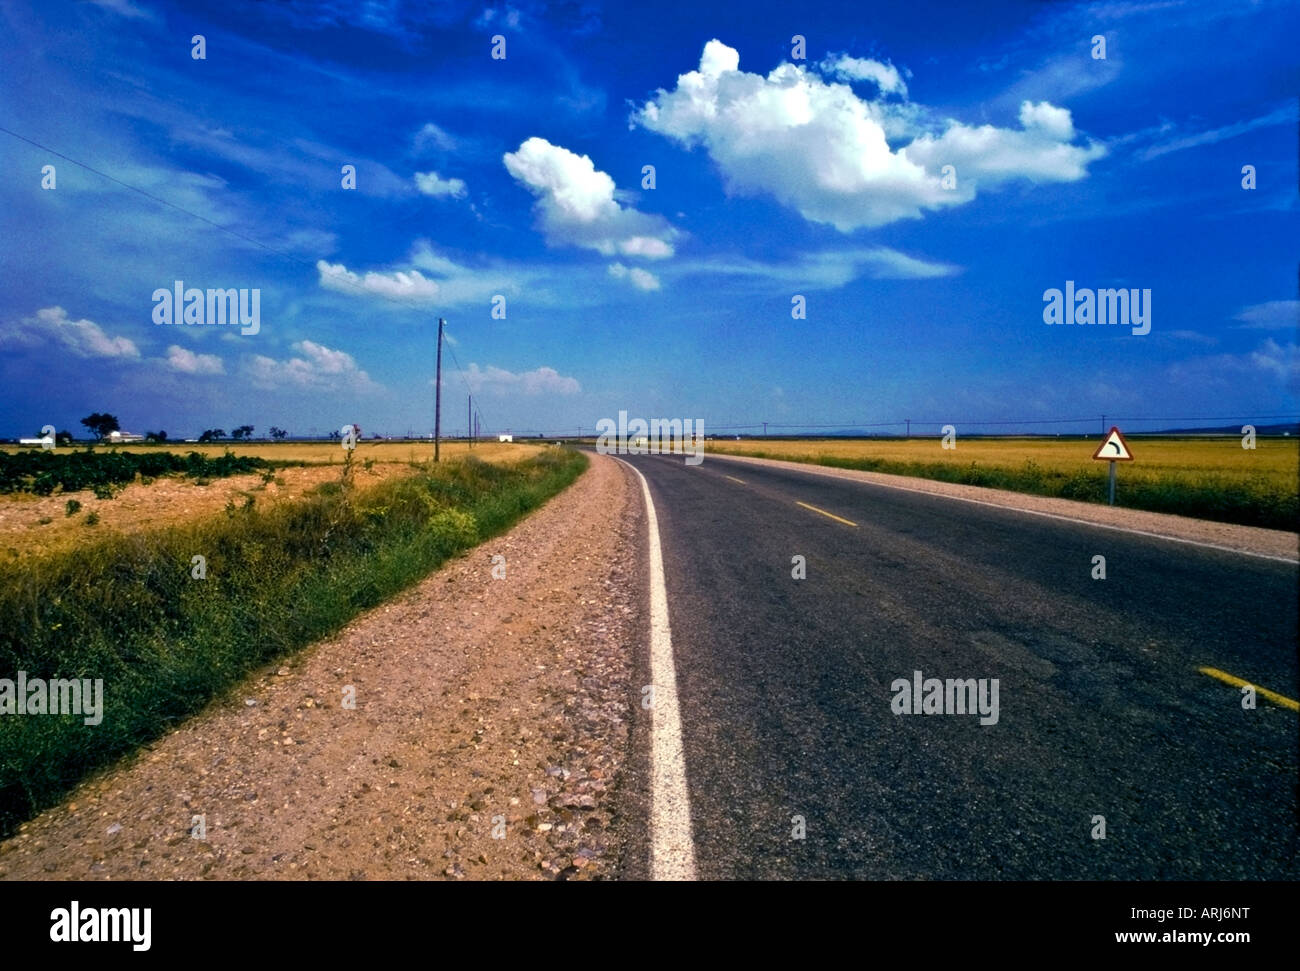 Road to nowhere, well, Toledo Spain really Stock Photo